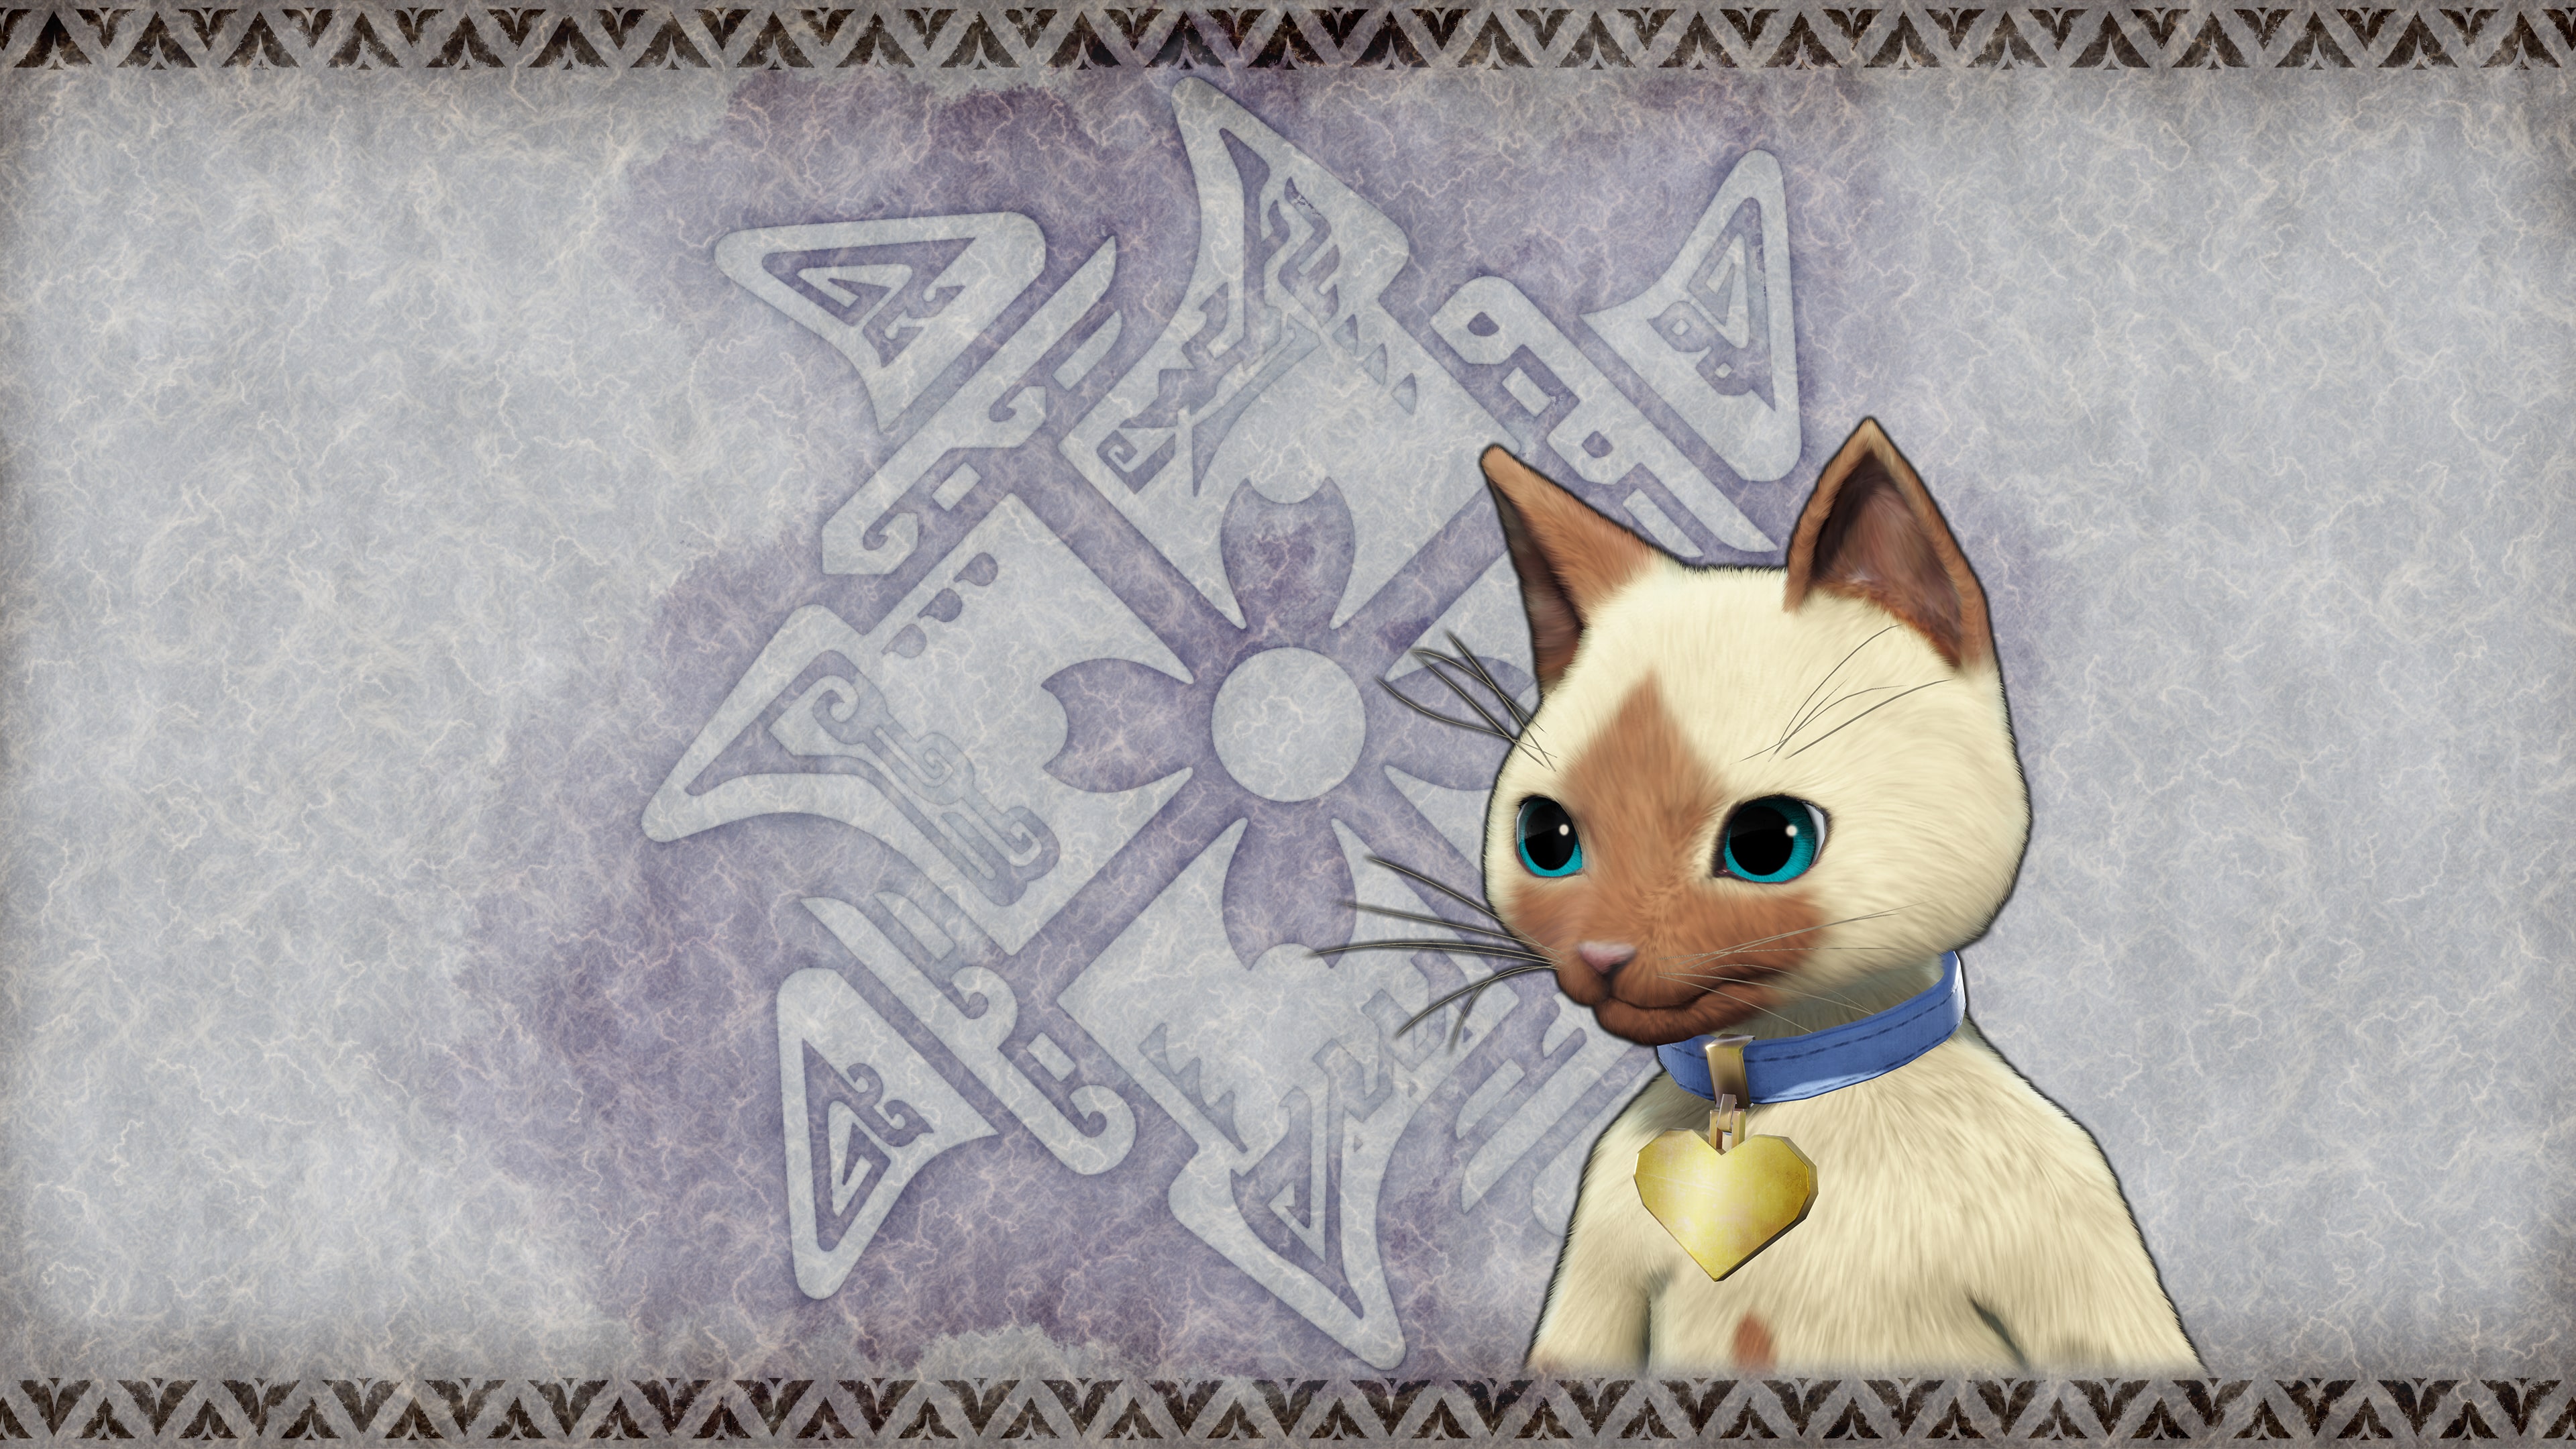 Monster Hunter Rise - "Heart Collar" Palico layered armor piece